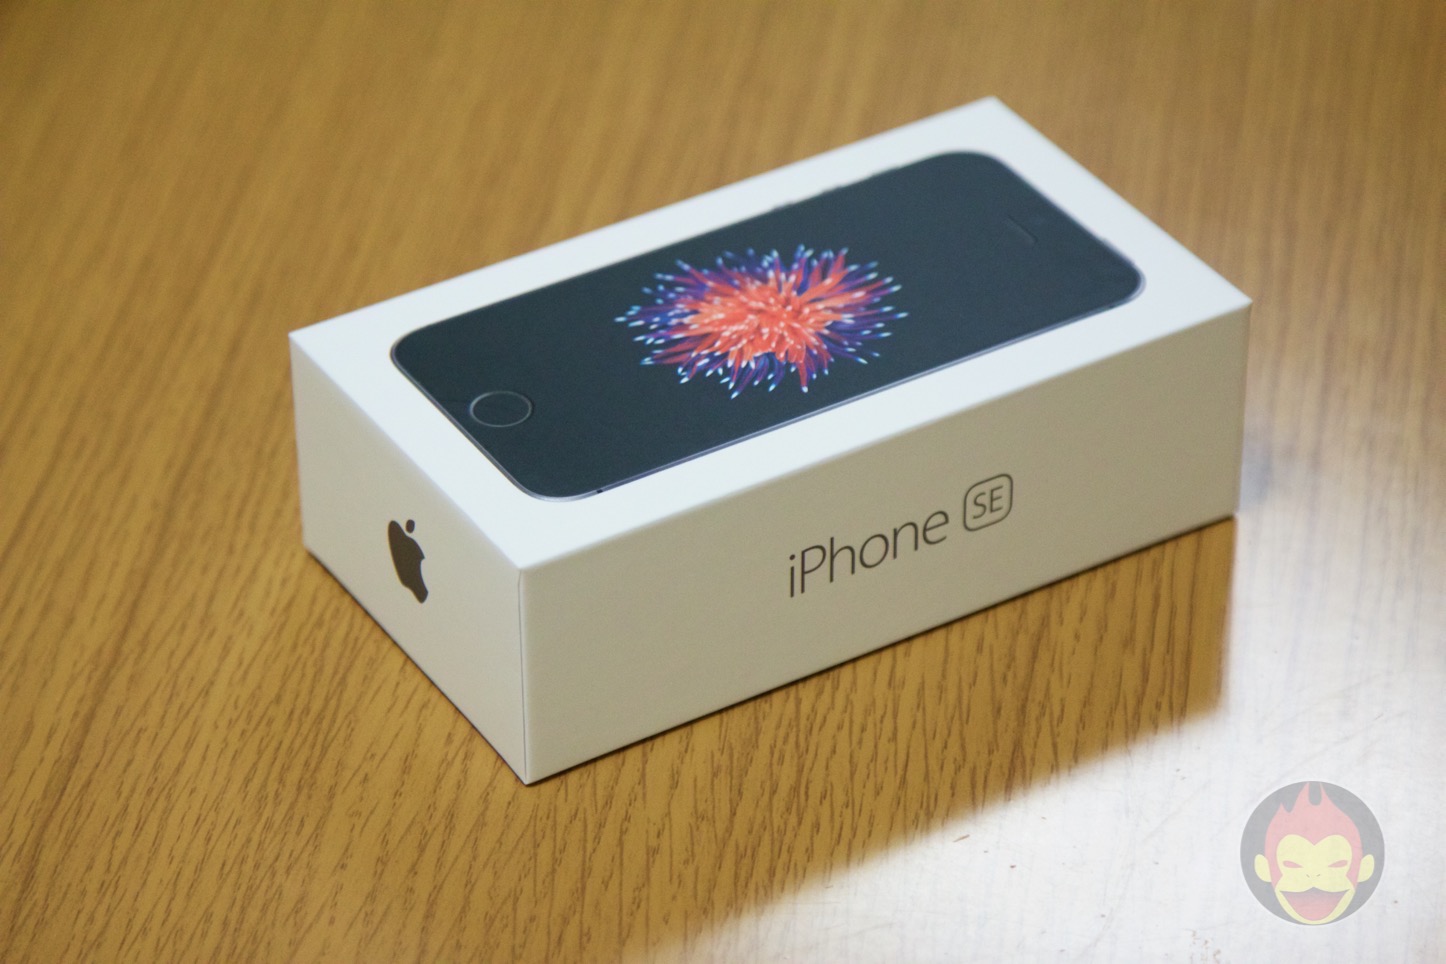 iPhone-SE-Space-Gray-64GB-Photo-Review-04.jpg